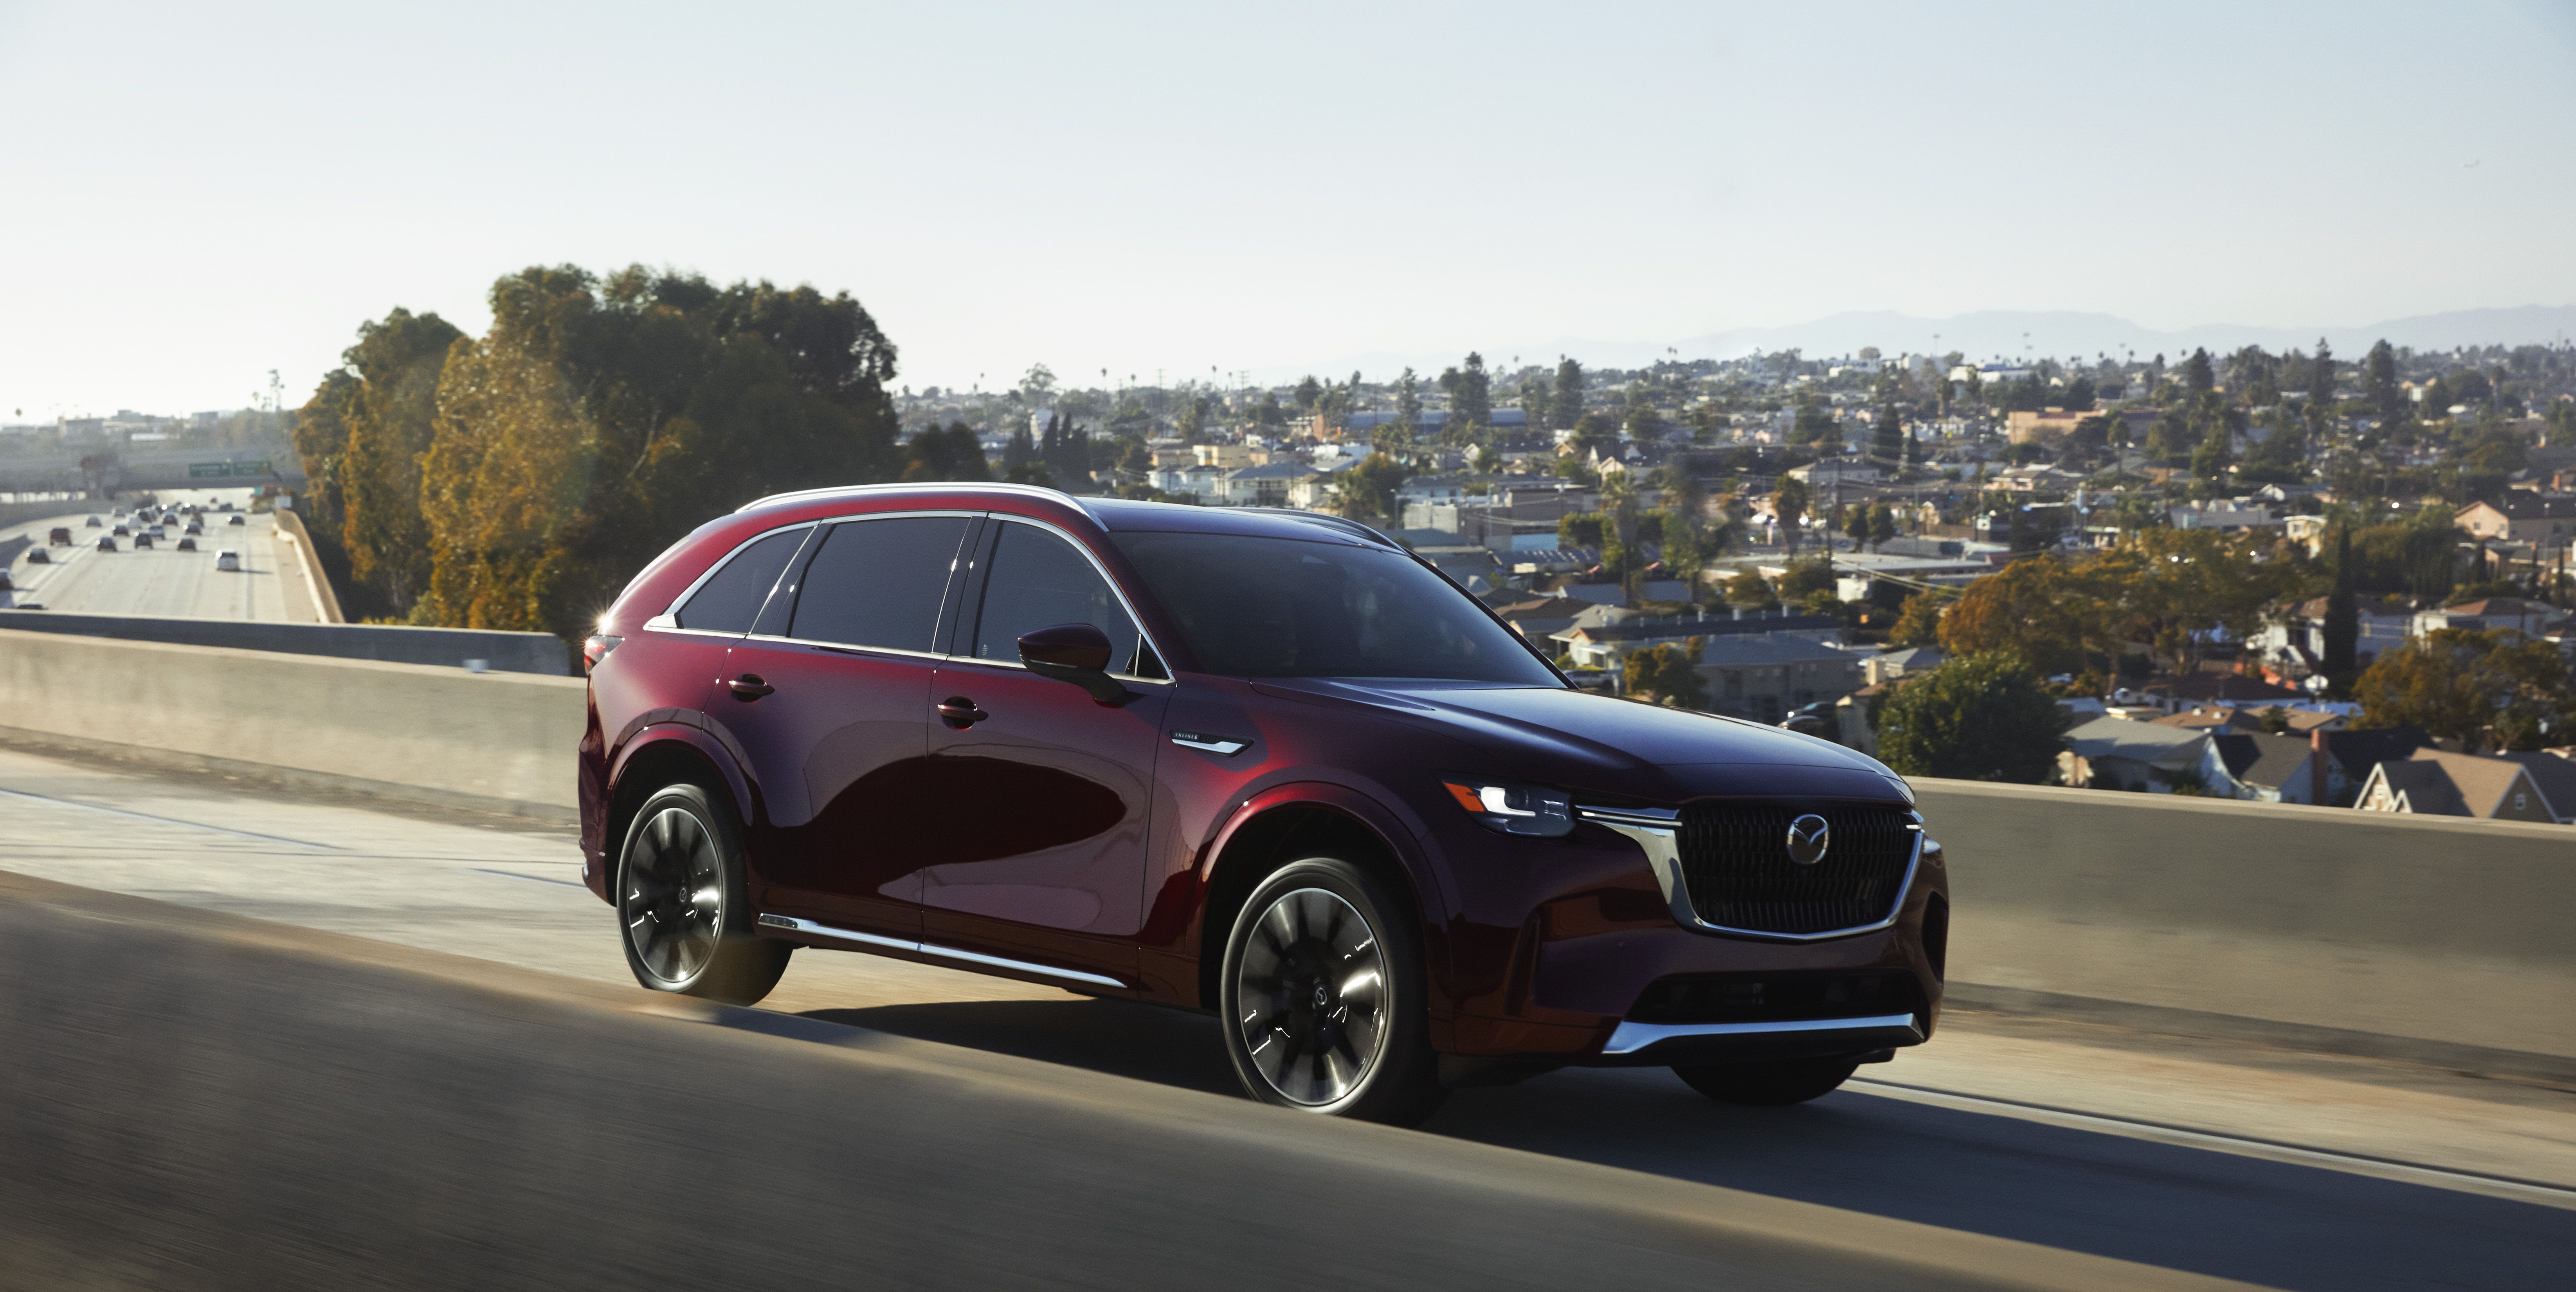 Mazda Aims for Premium with the Big, Bold, All-New CX-90 Crossover